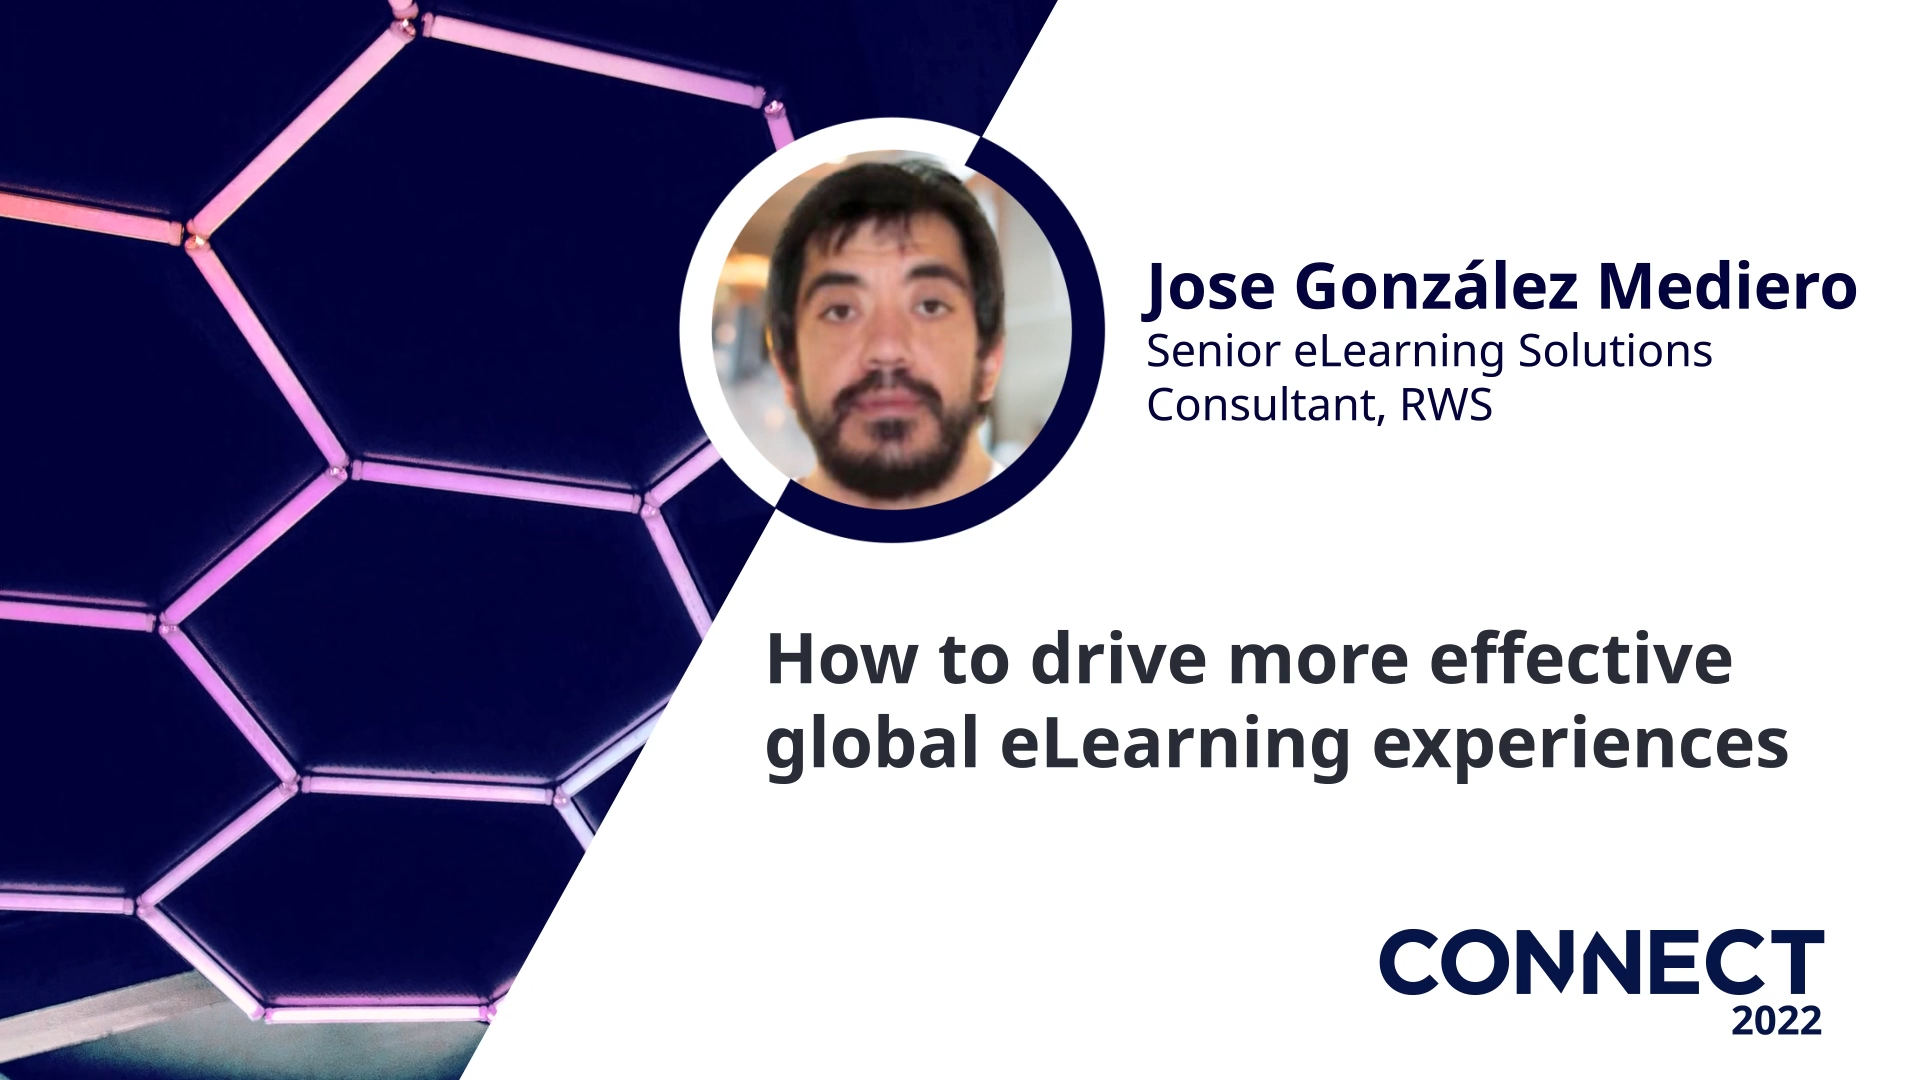 Connect 2022 - How to drive more effective global elearning experiences